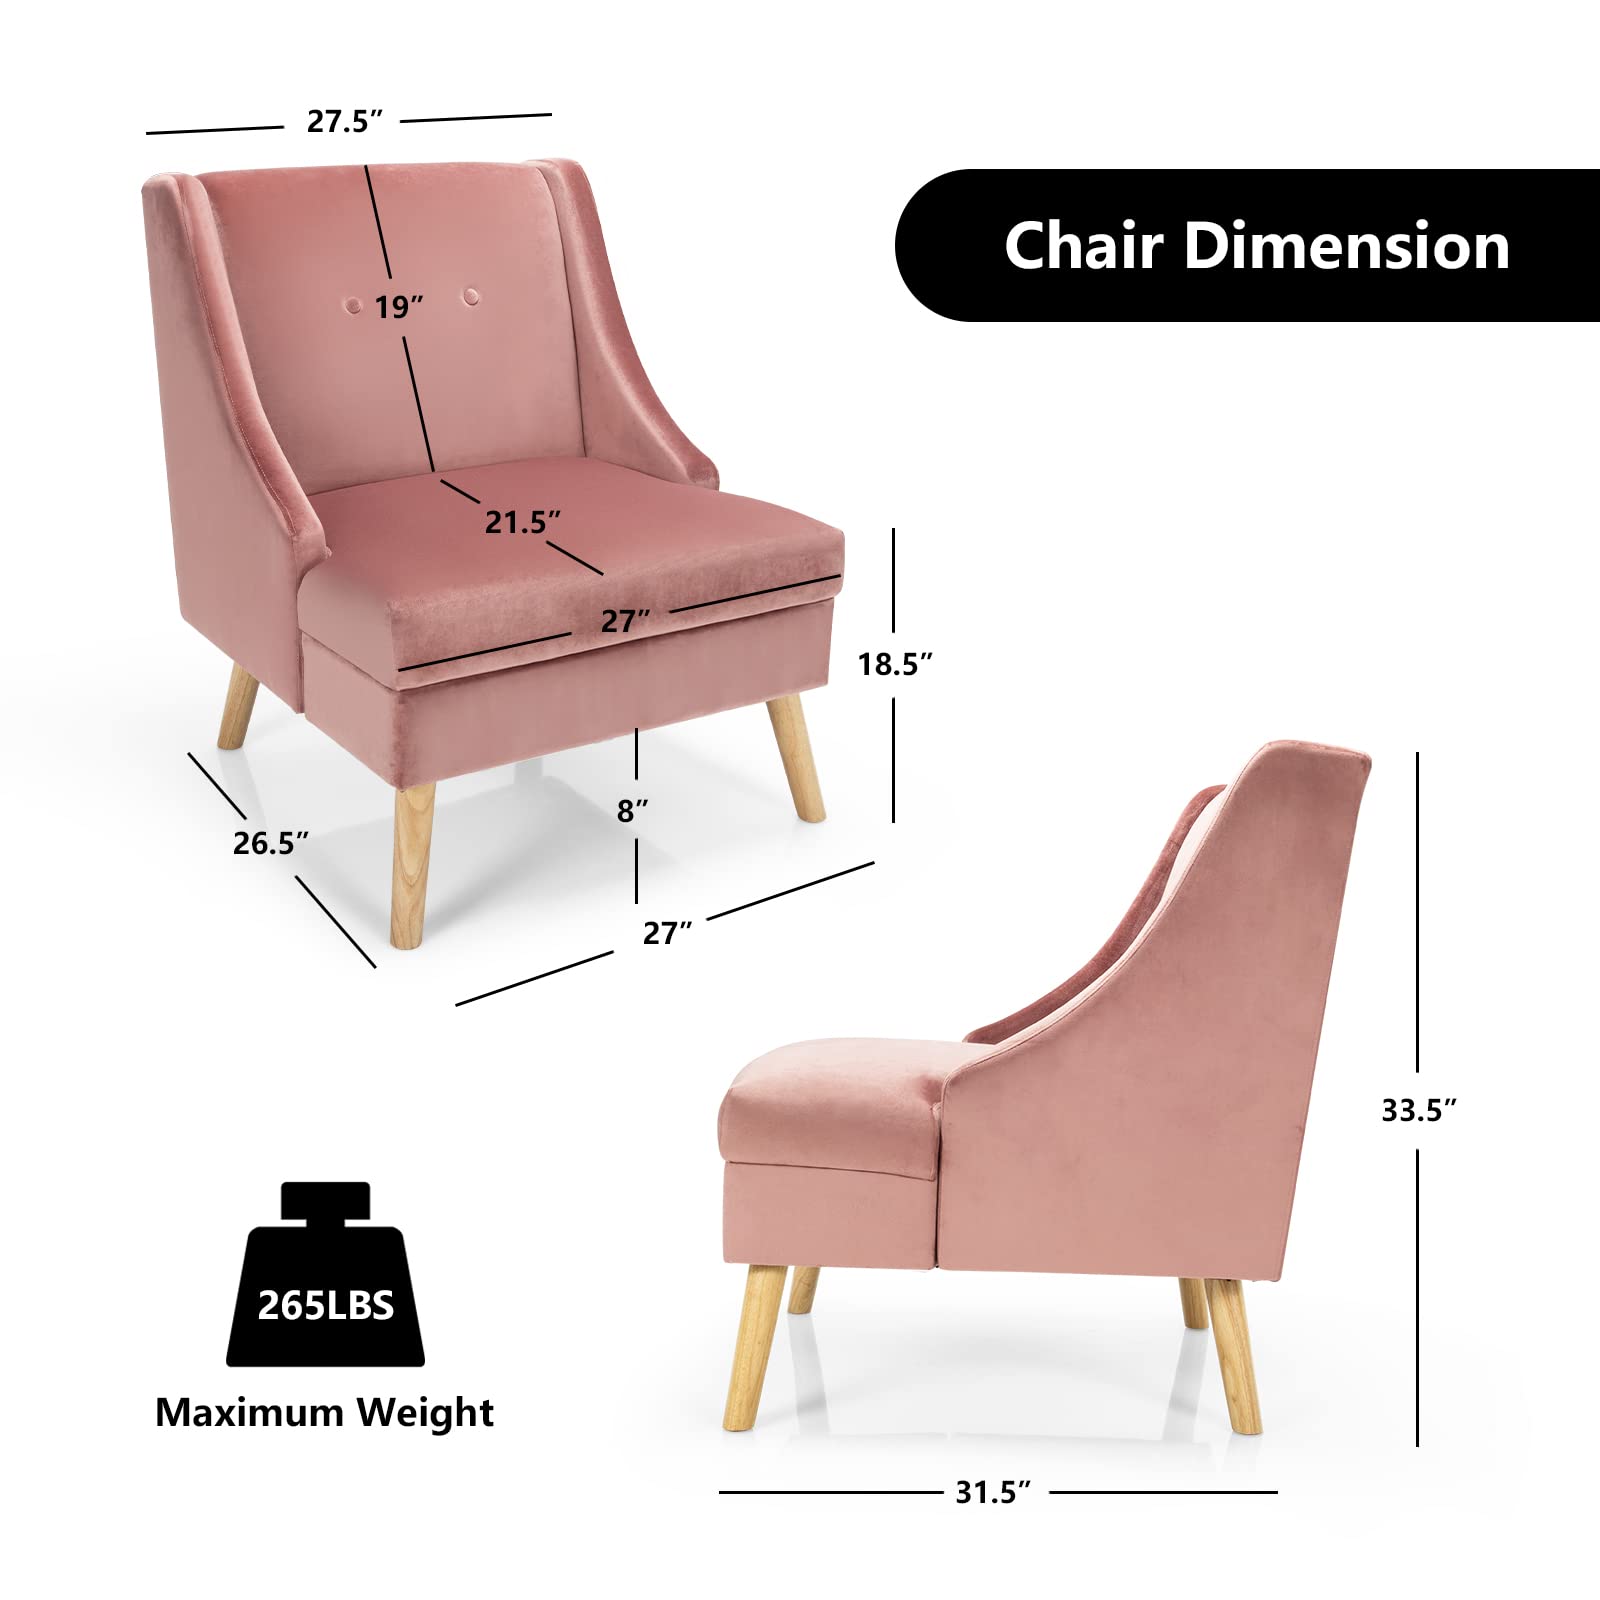 Giantex Pink Accent Chair, Comfy Velvet Swoop Chair w/Rubber Wood Legs, Padded Seat